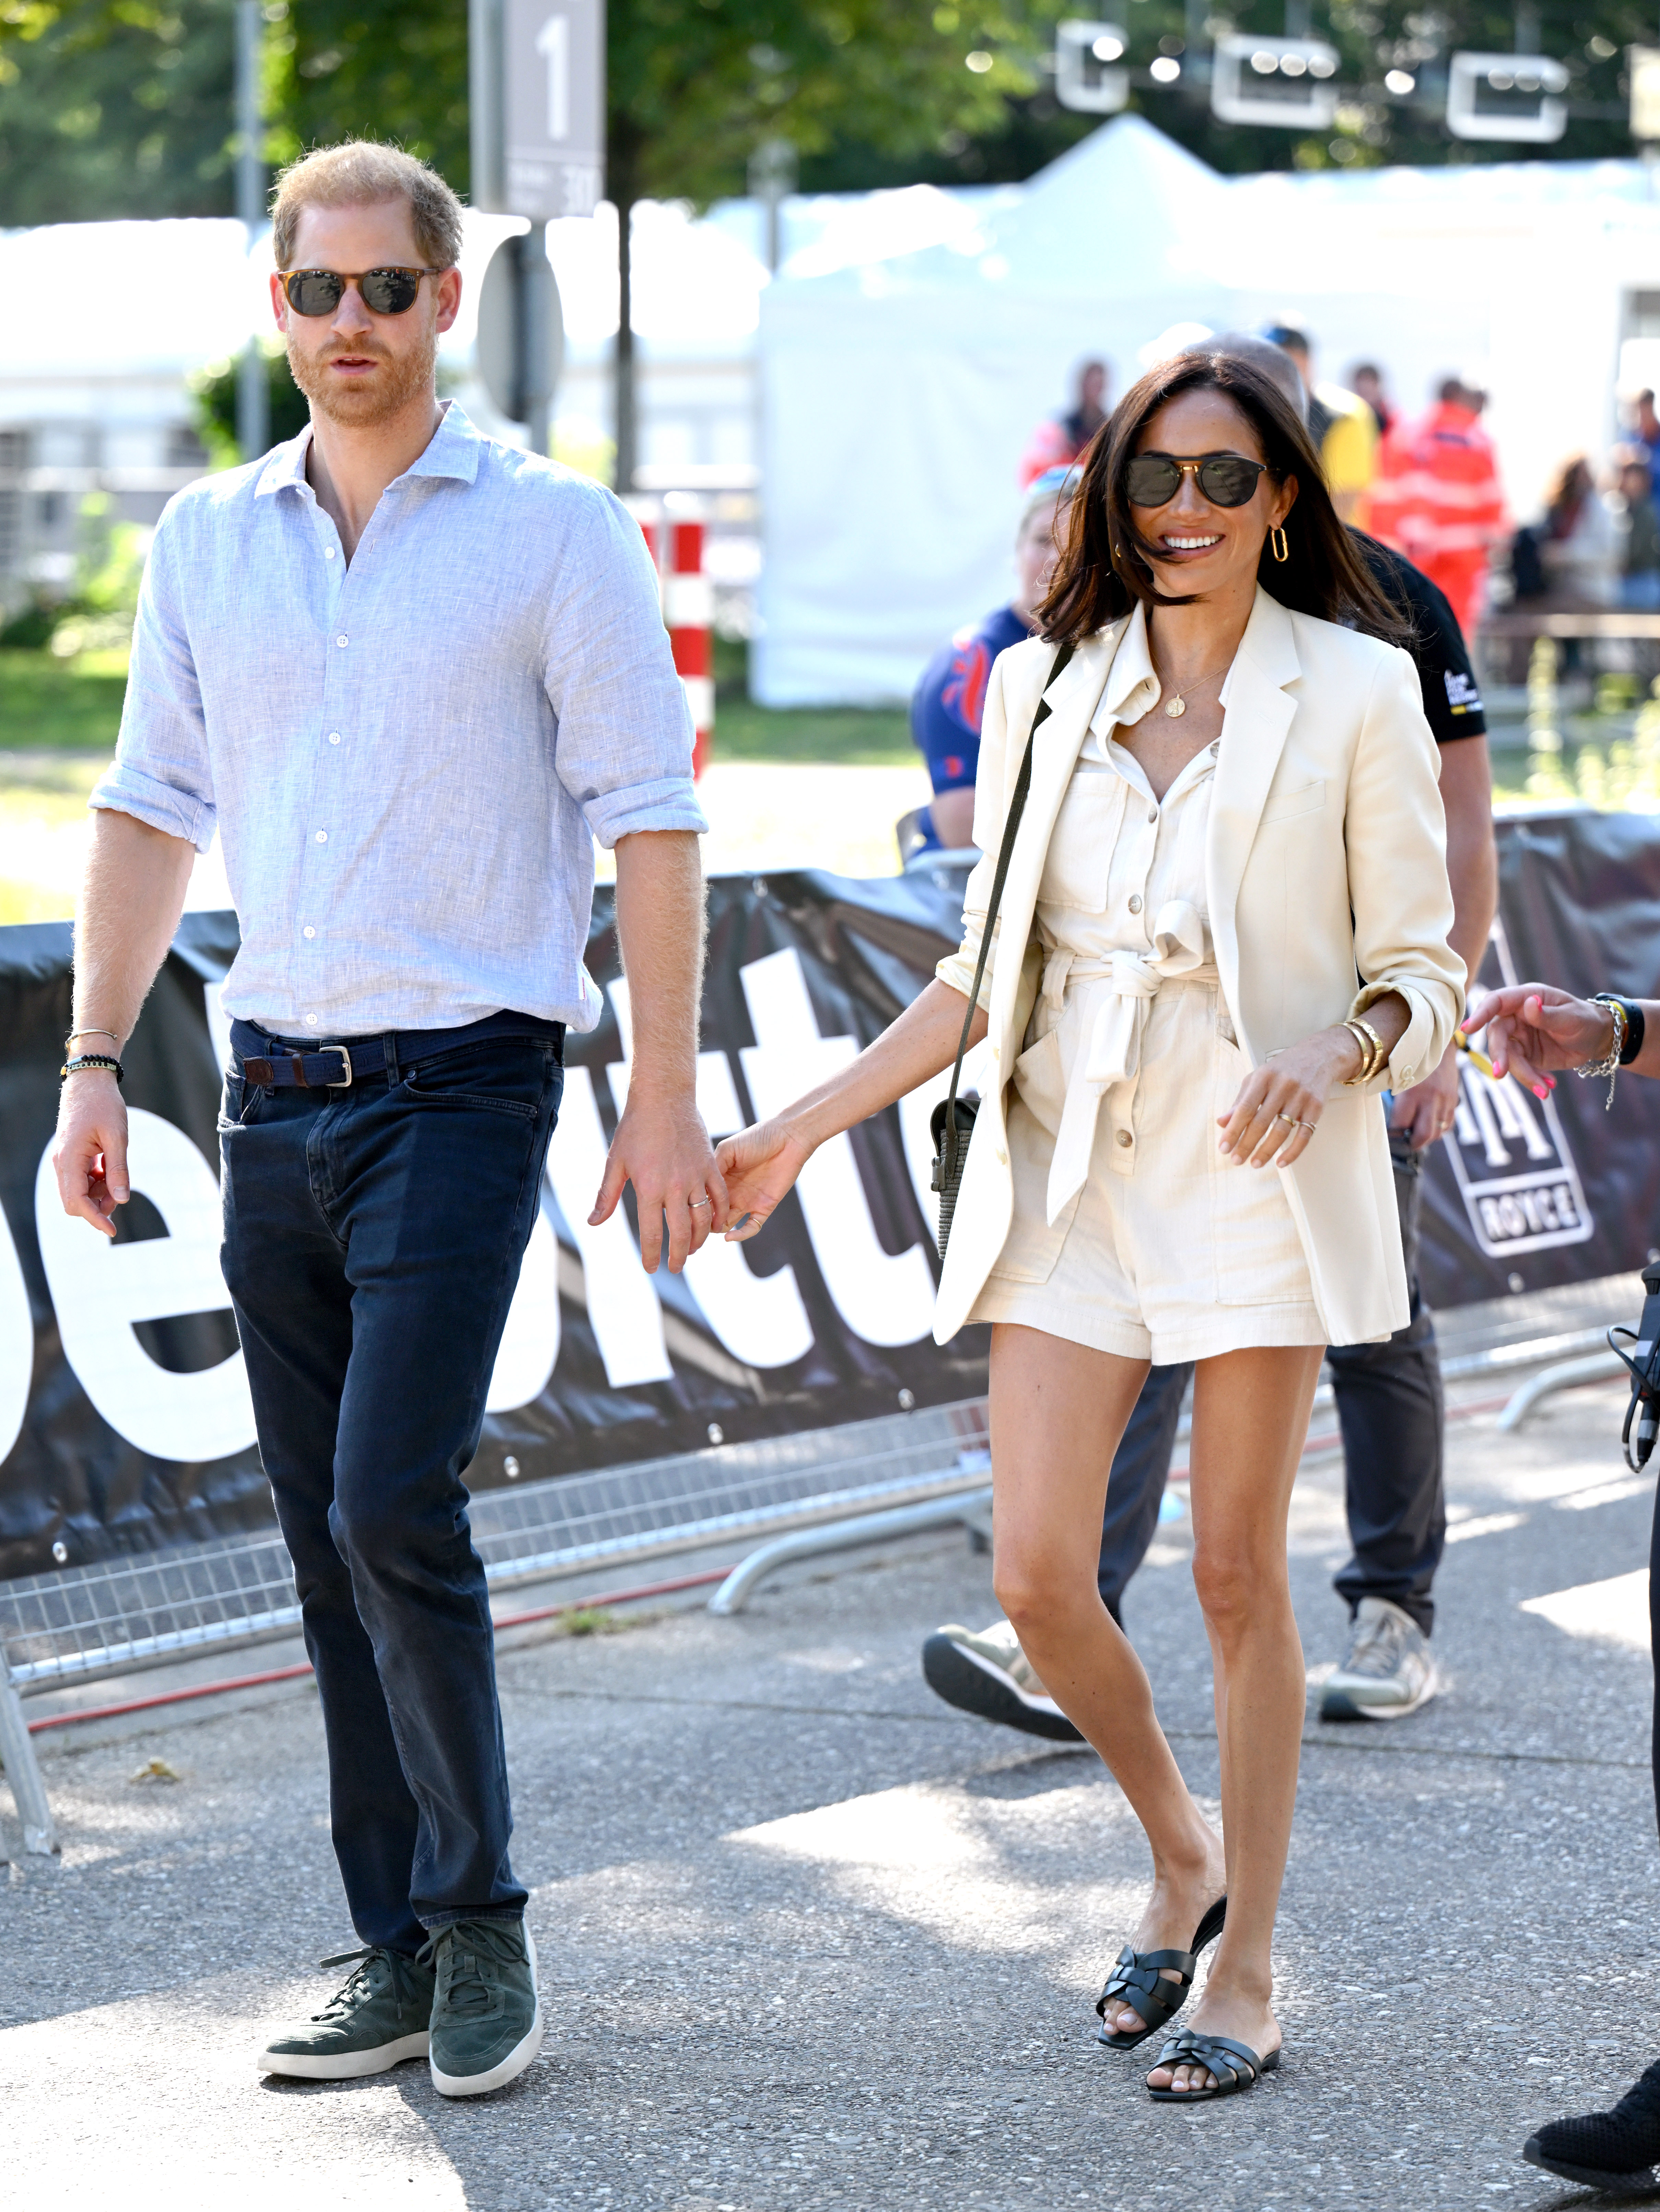 Prince Harry and Meghan Markle at the cycling medal ceremony at the Cycling Track during the Invictus Games in Düsseldorf, Germany on September 15, 2023 | Source: Getty Images